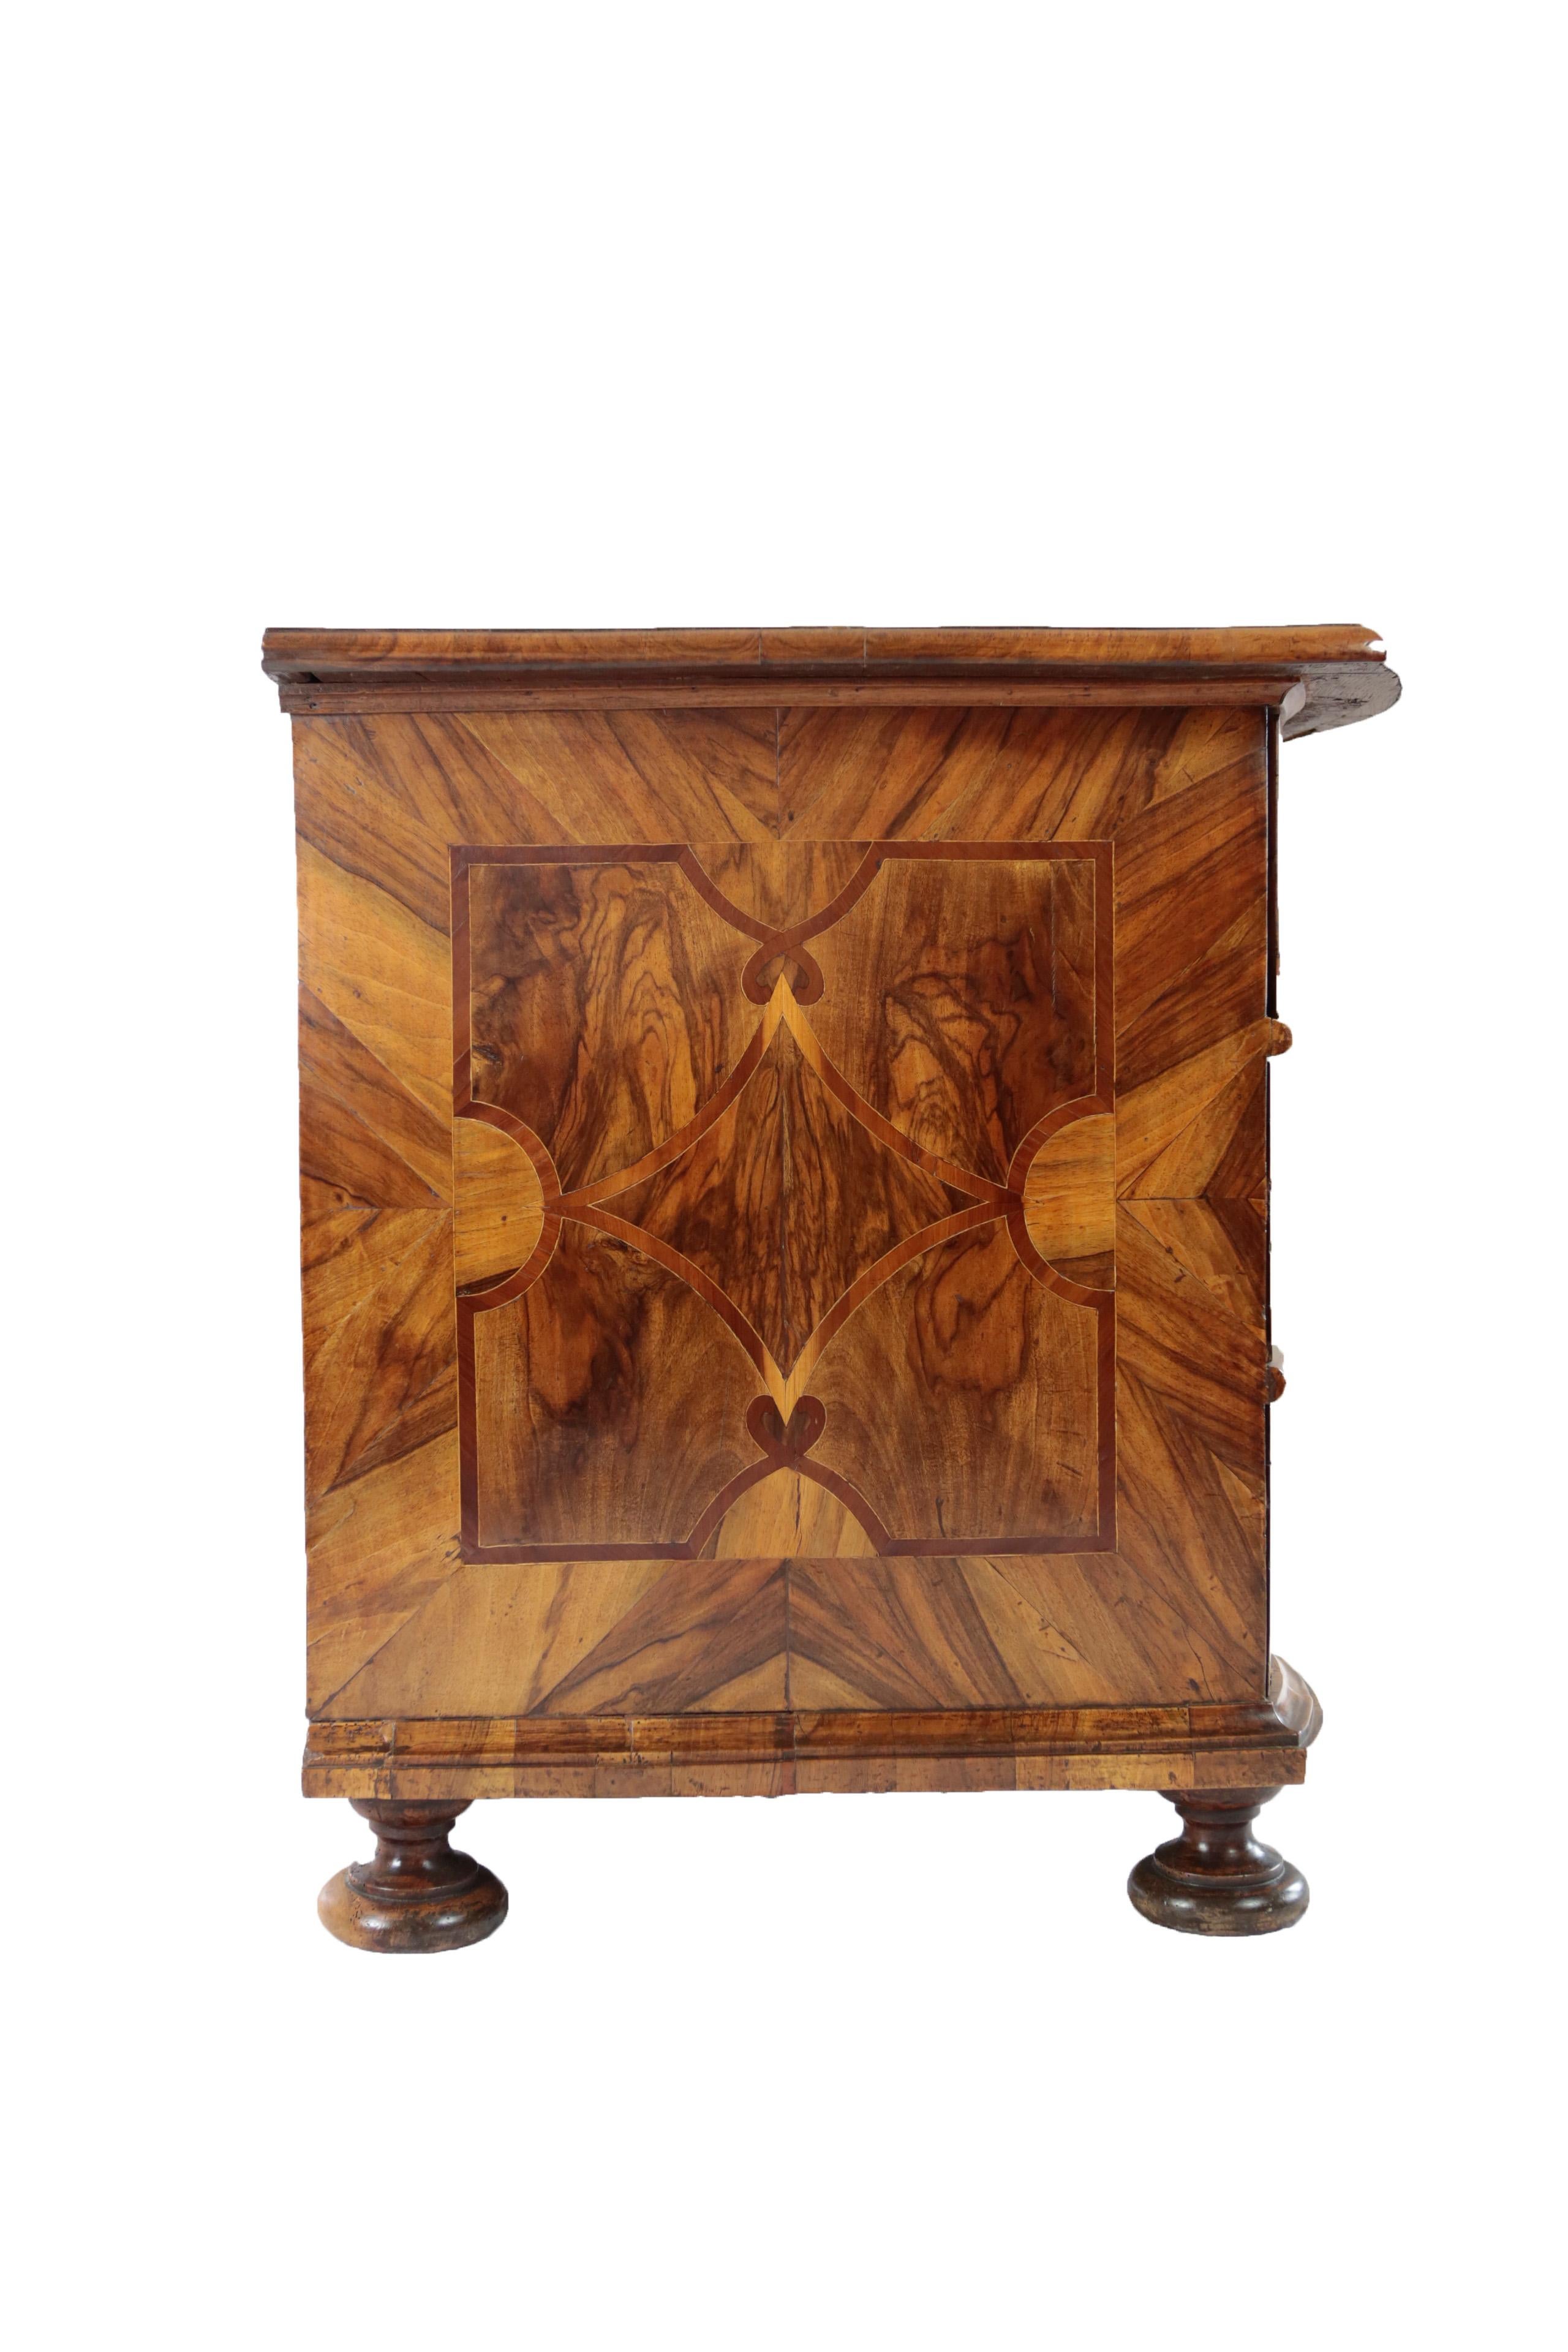 18th Century Baroque Chest of Drawers Nutwood, South Germany im Zustand „Gut“ im Angebot in Muenster, NRW